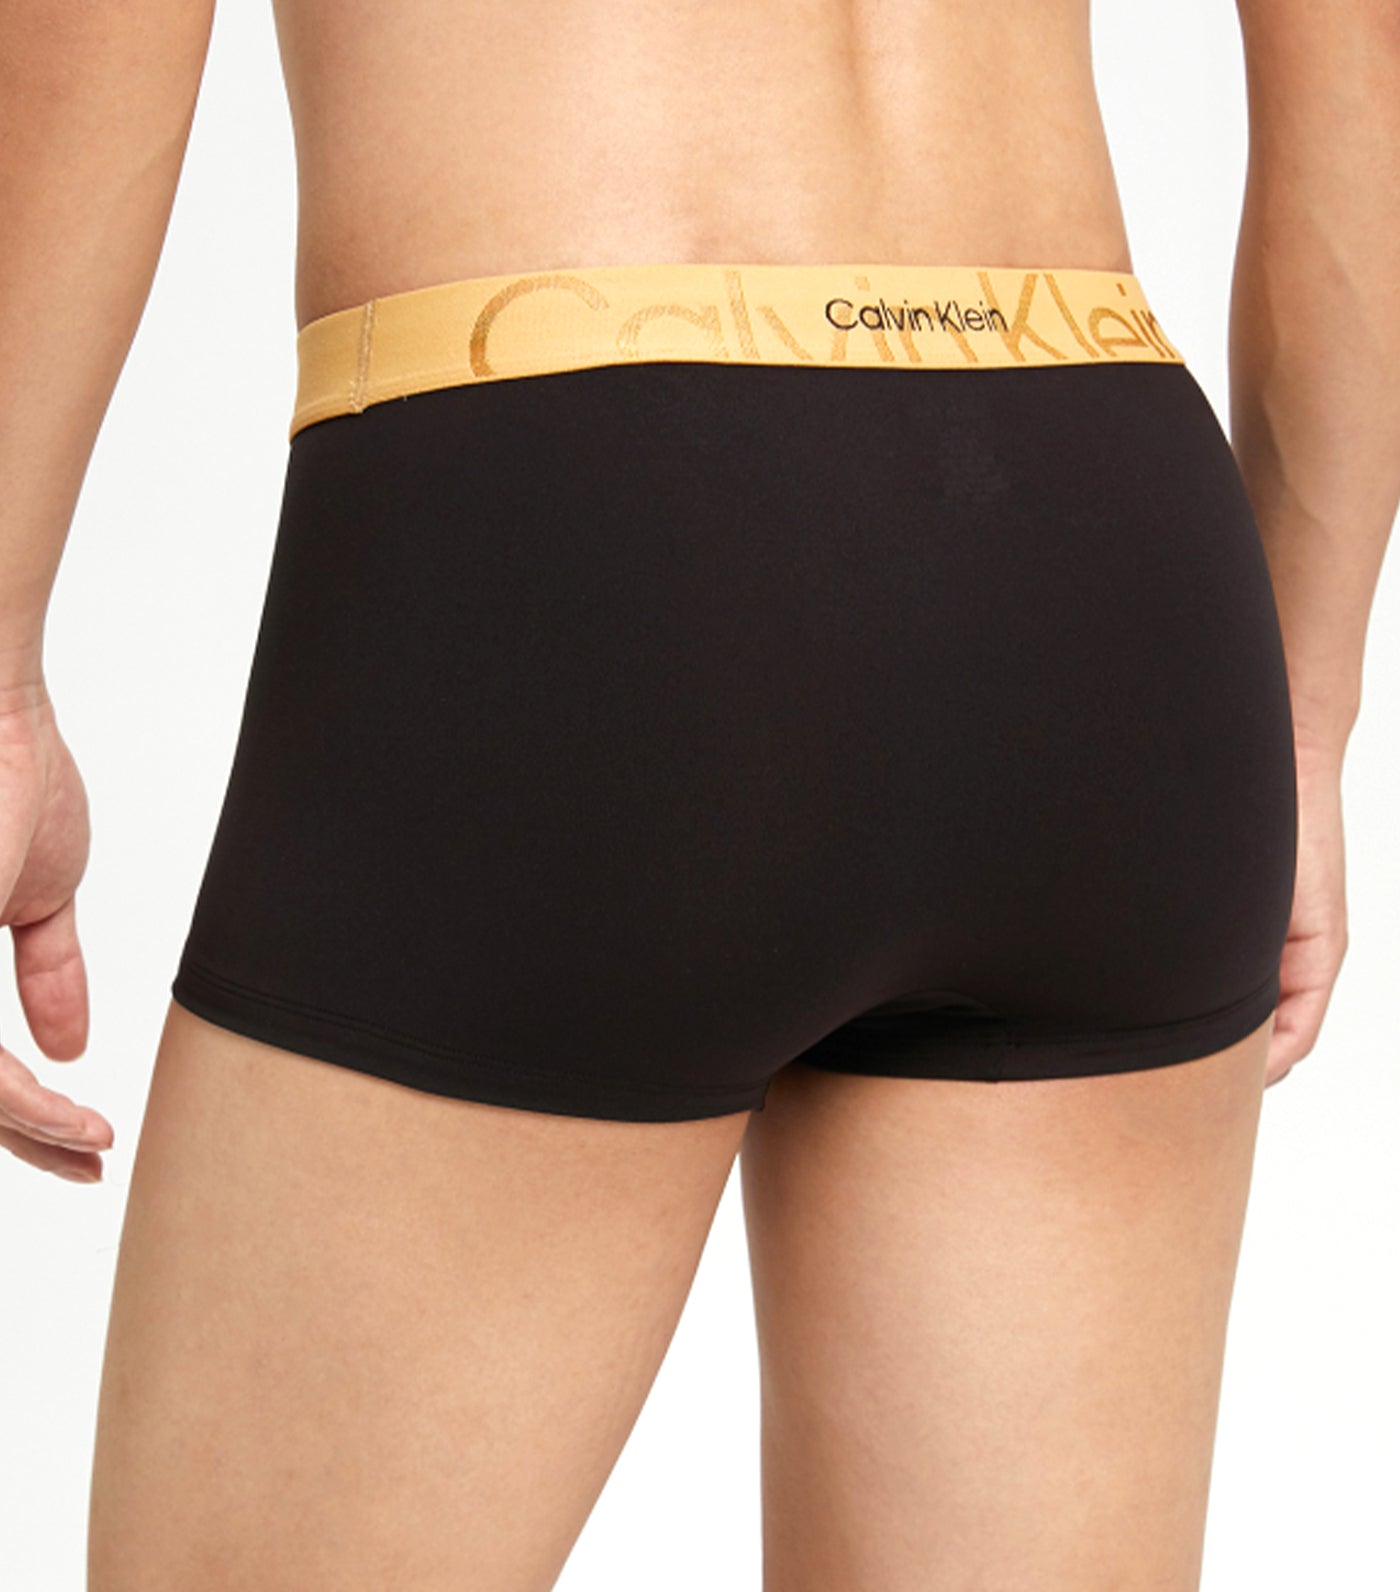 Calvin Klein CK Black low rise trunk in black with gold logo waistband